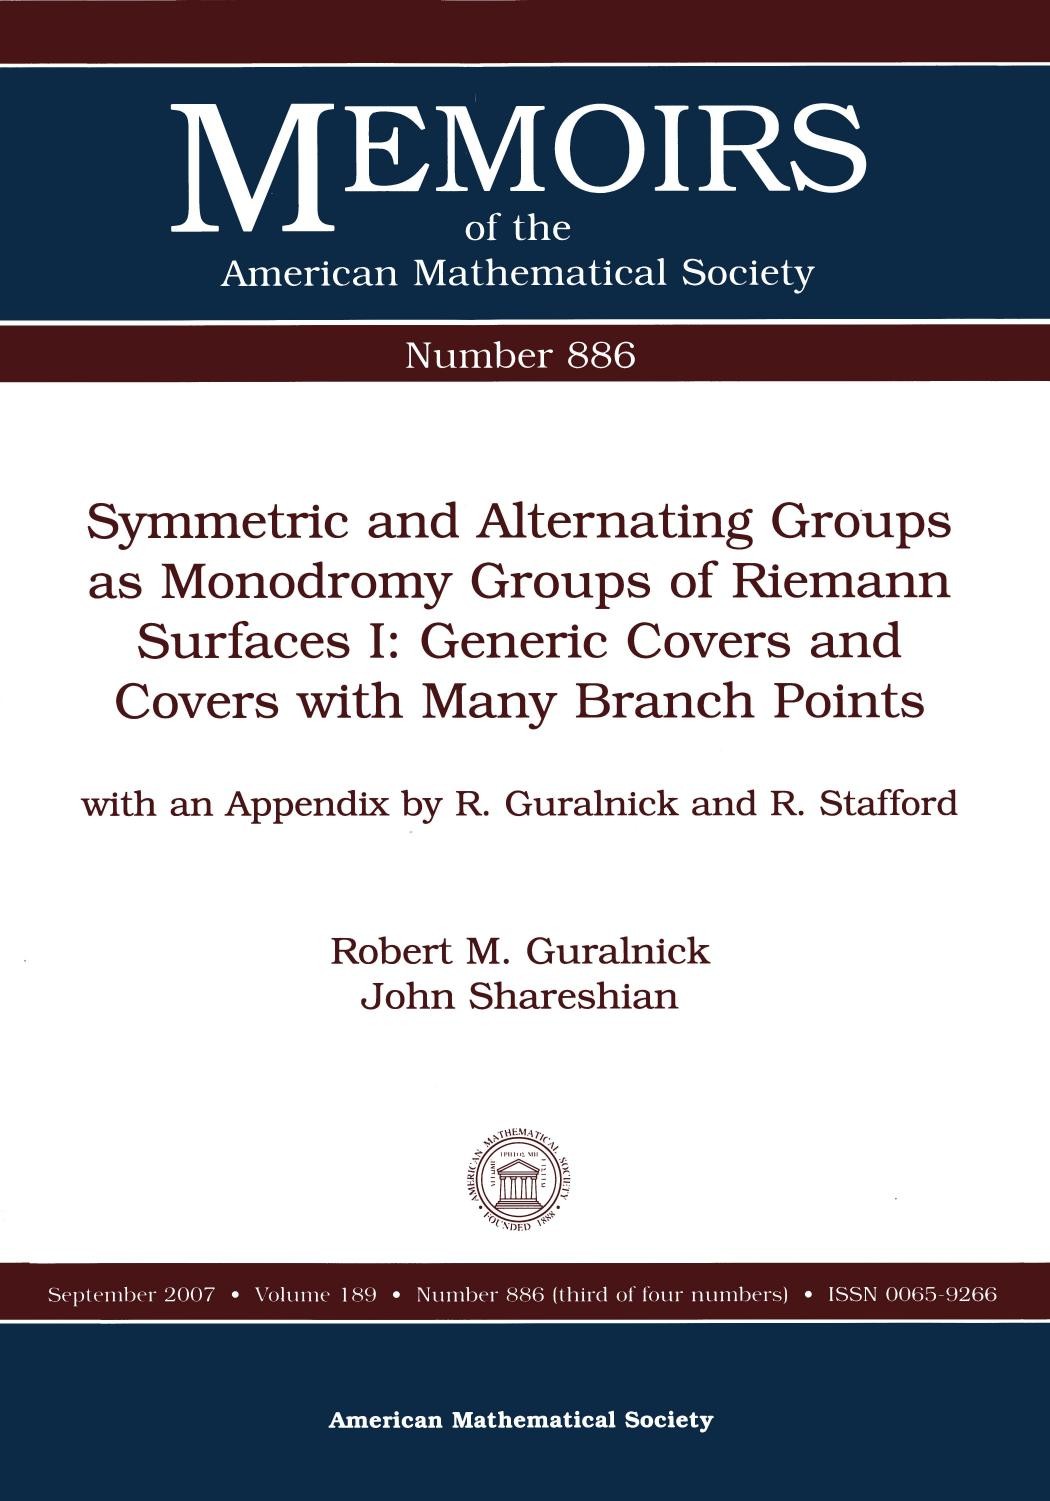 Symmetric and Alternating Groups as Monodromy Groups of Riemann Surfaces I: Generic Covers and Covers With Many Branch Points